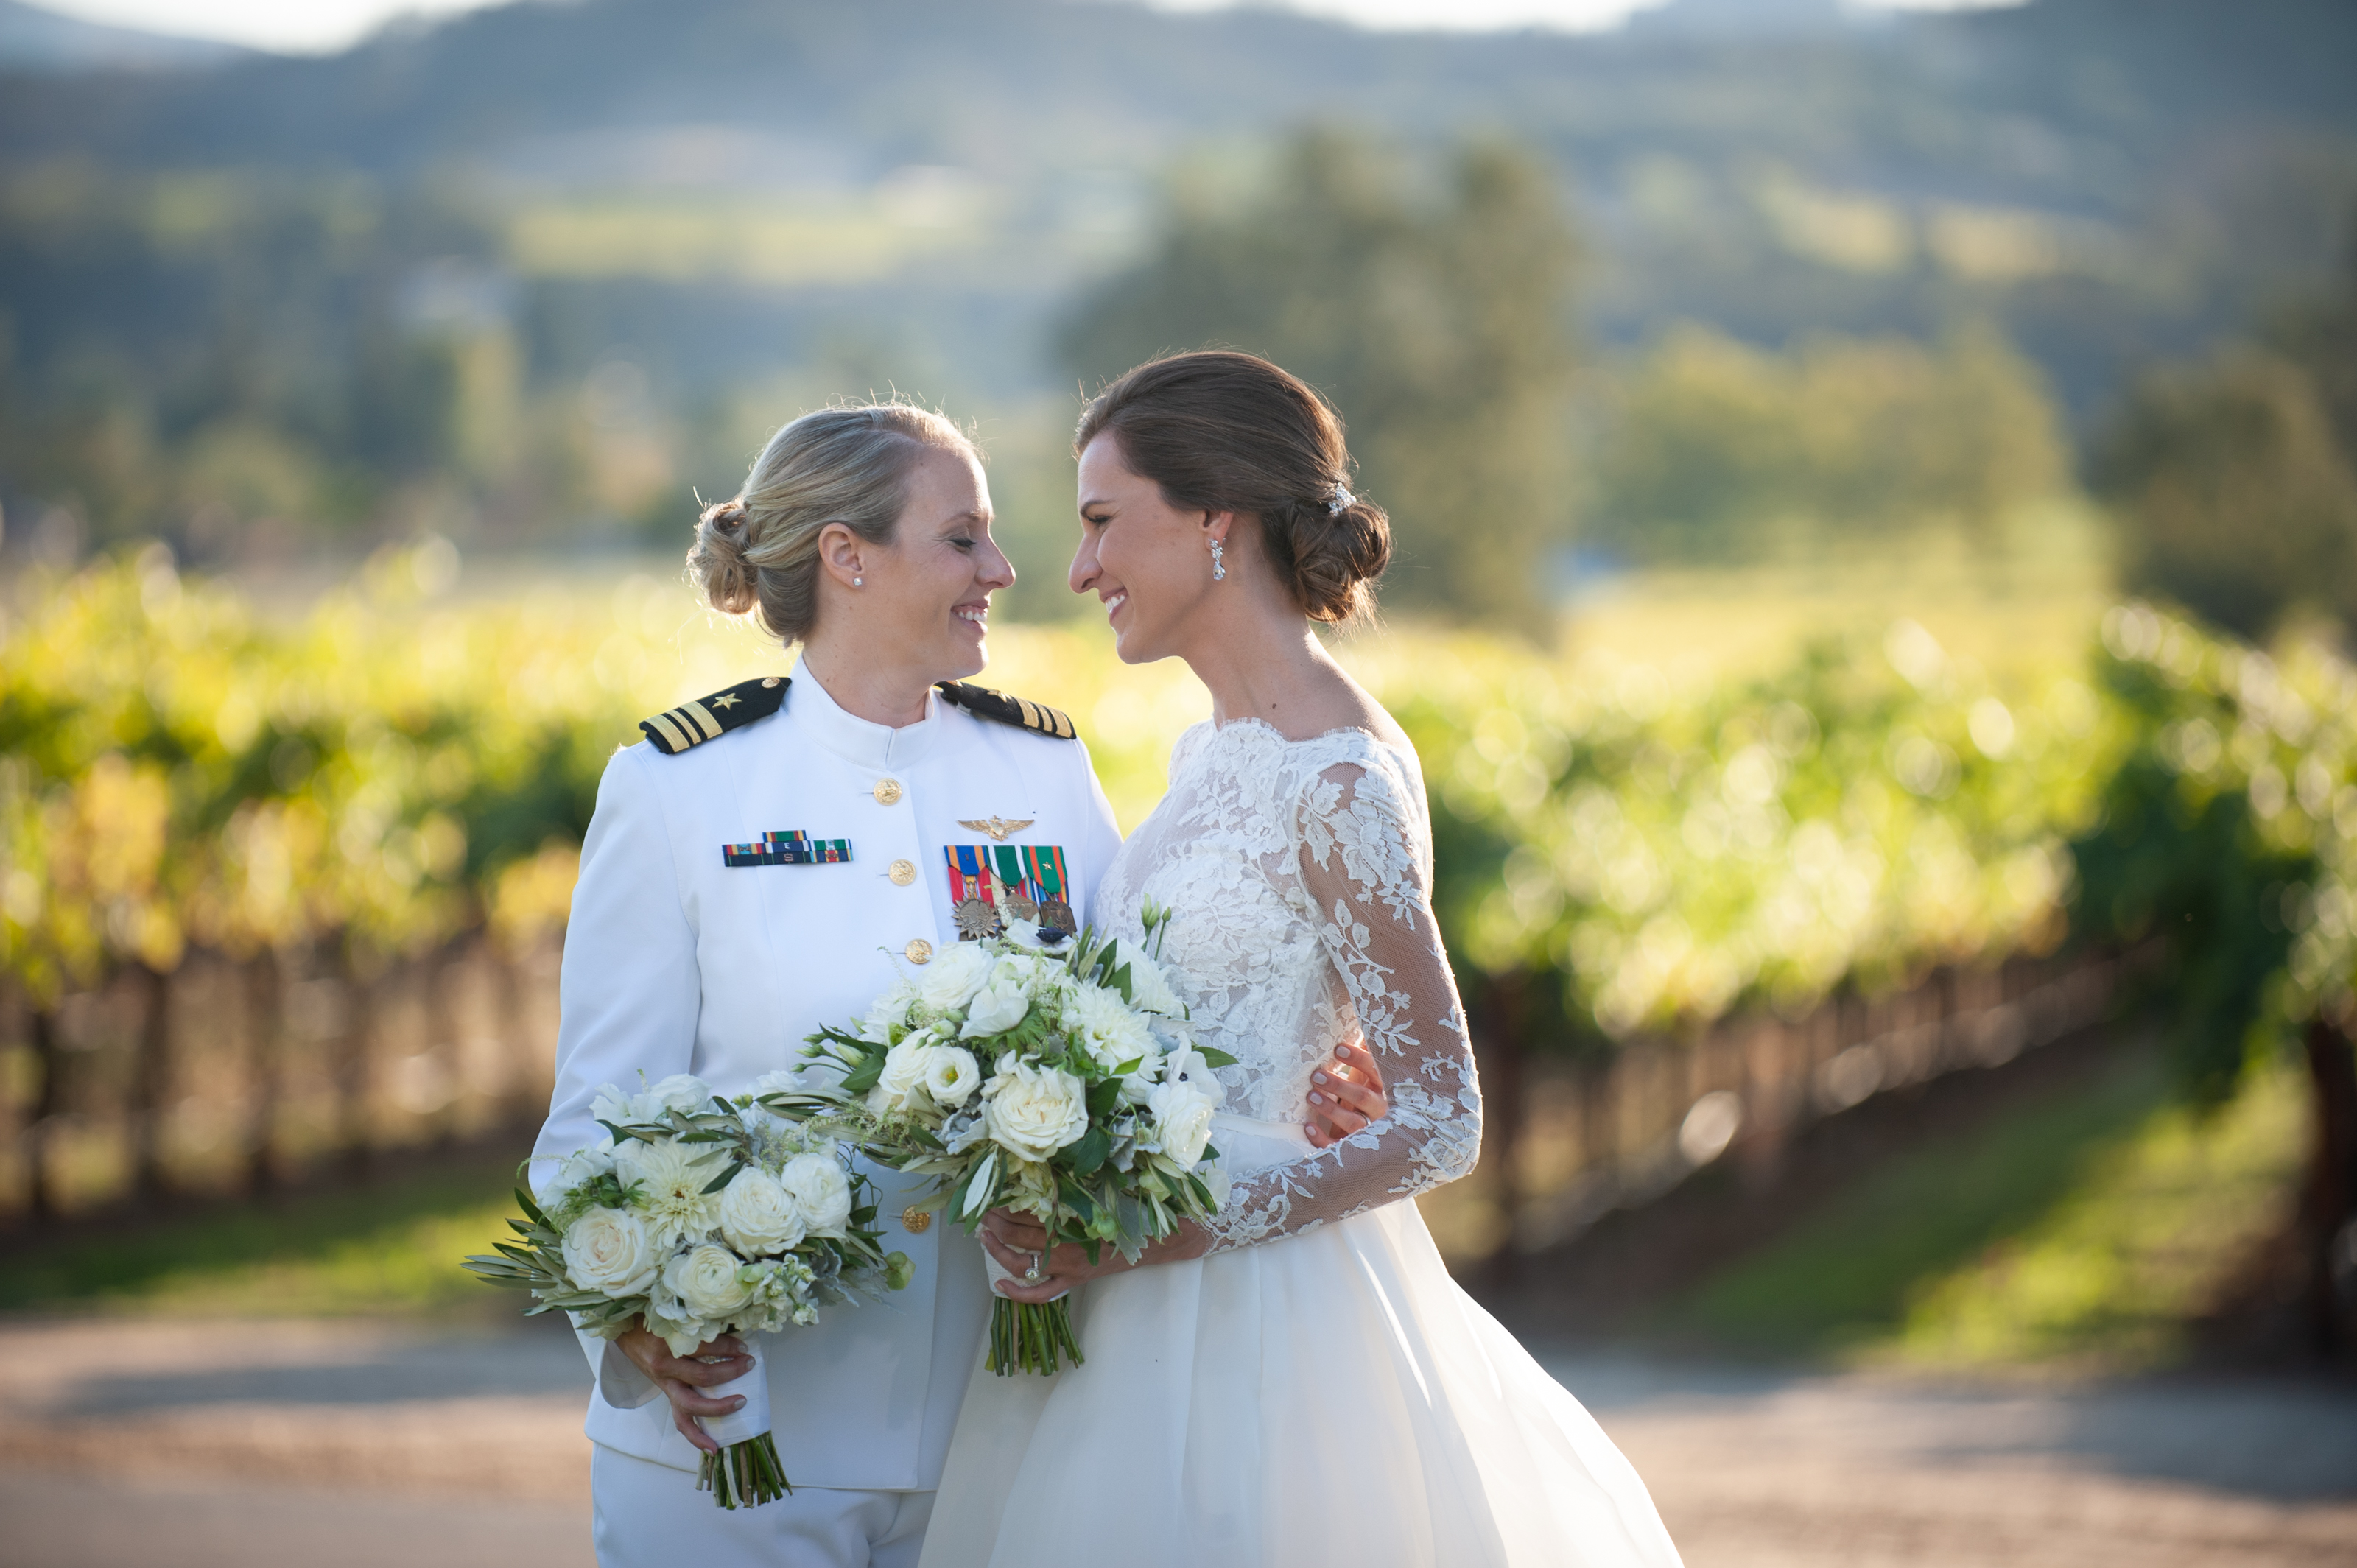 Bethany & Christy ~ Chateau St. Jean Winery Wedding